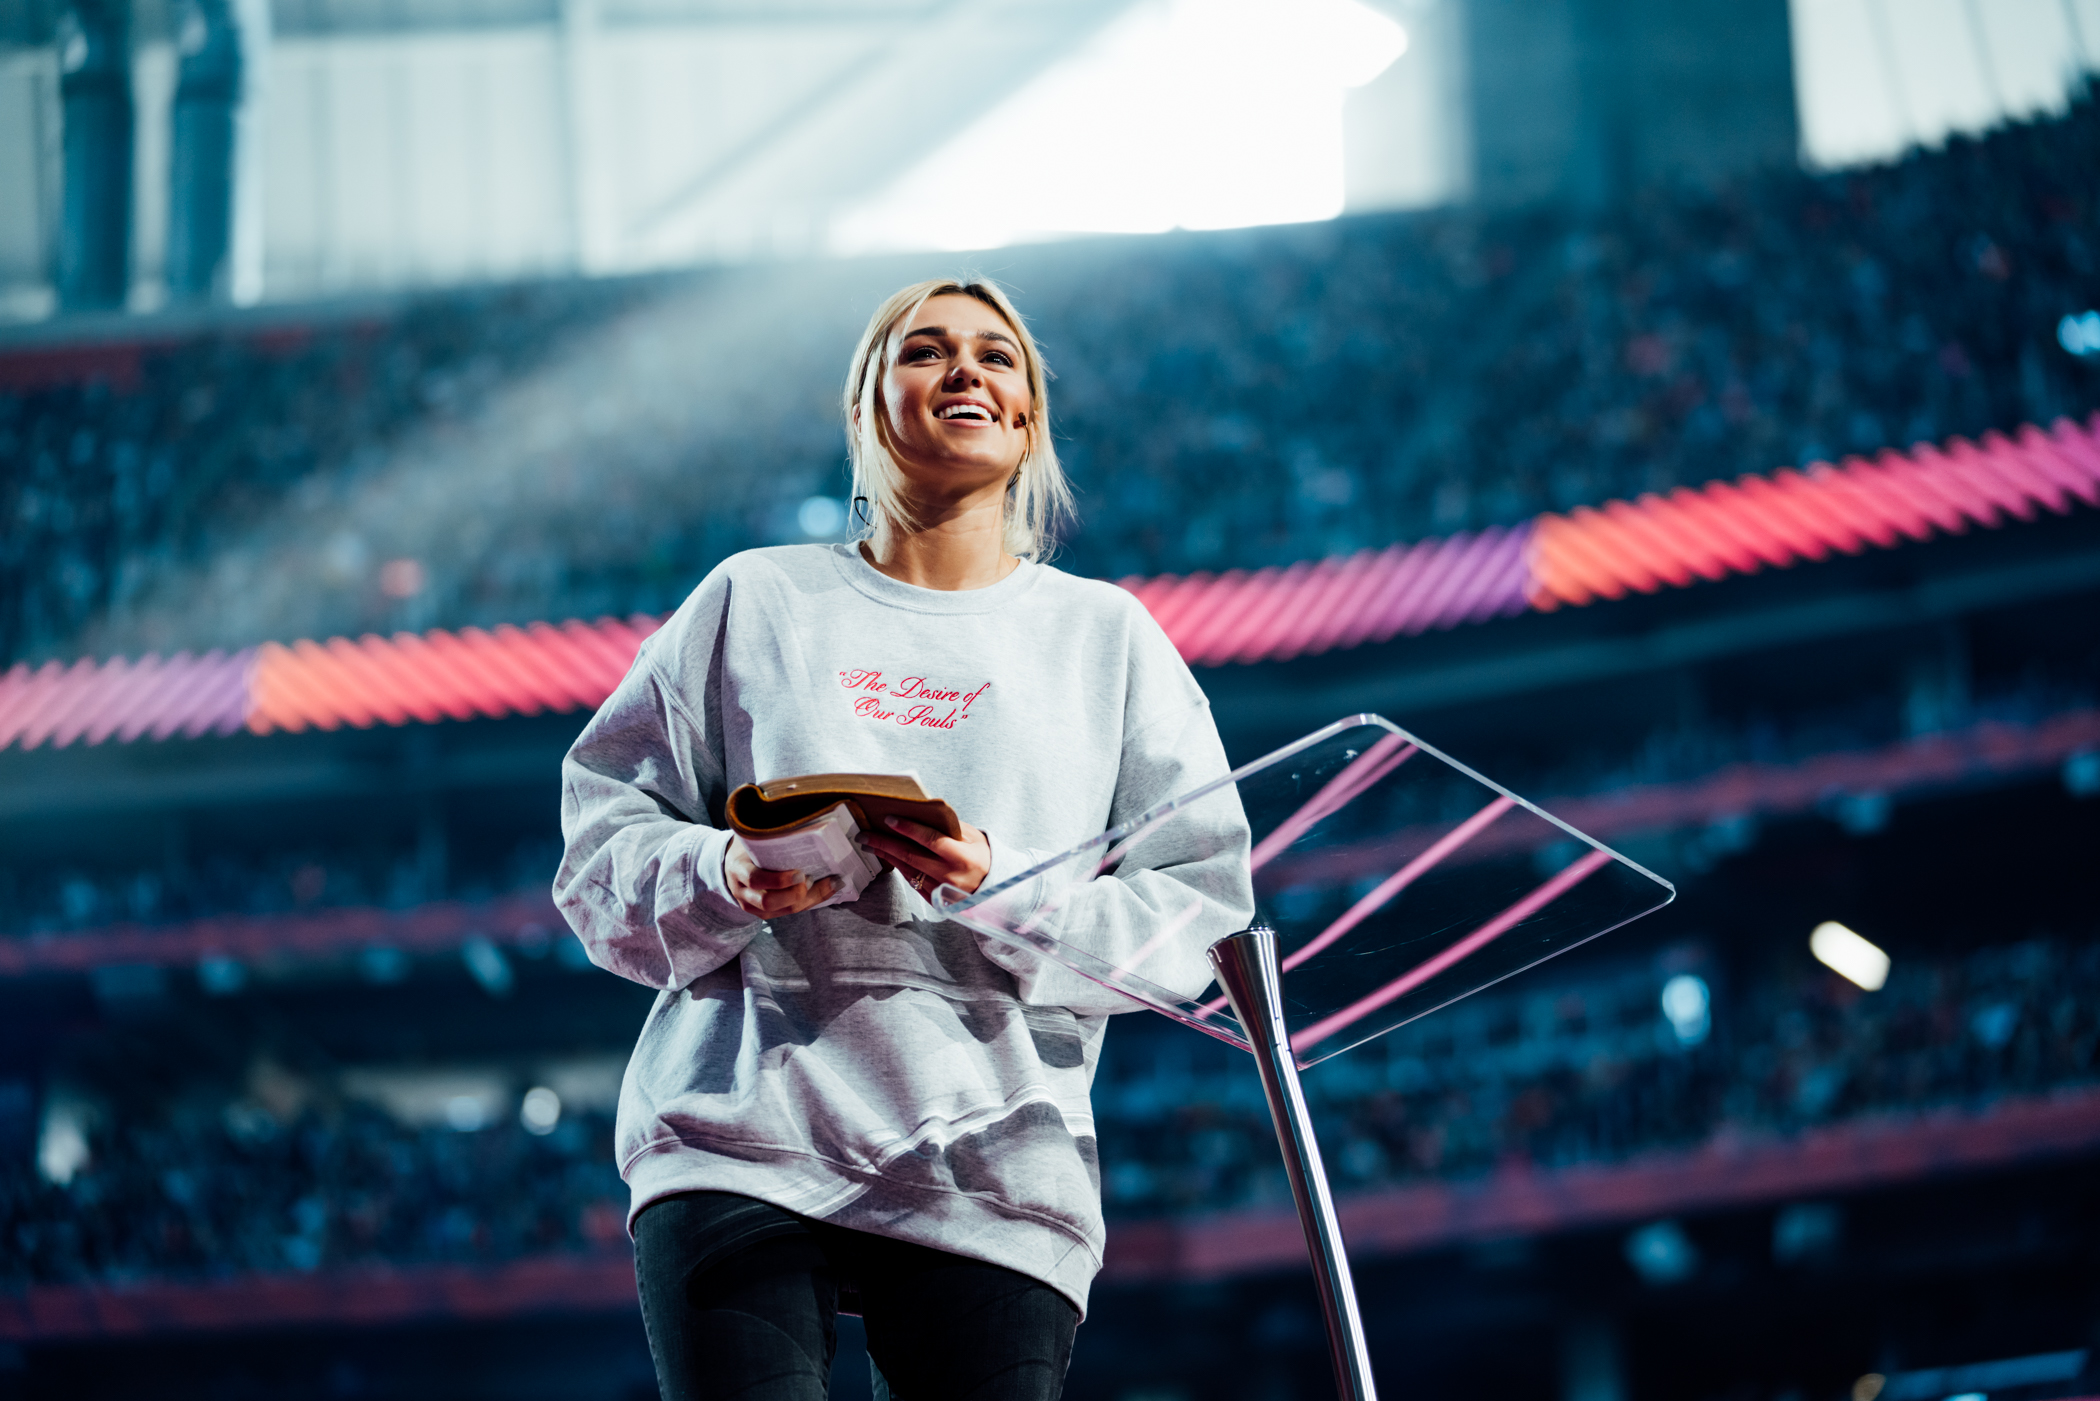 Passion 2020 Highlights